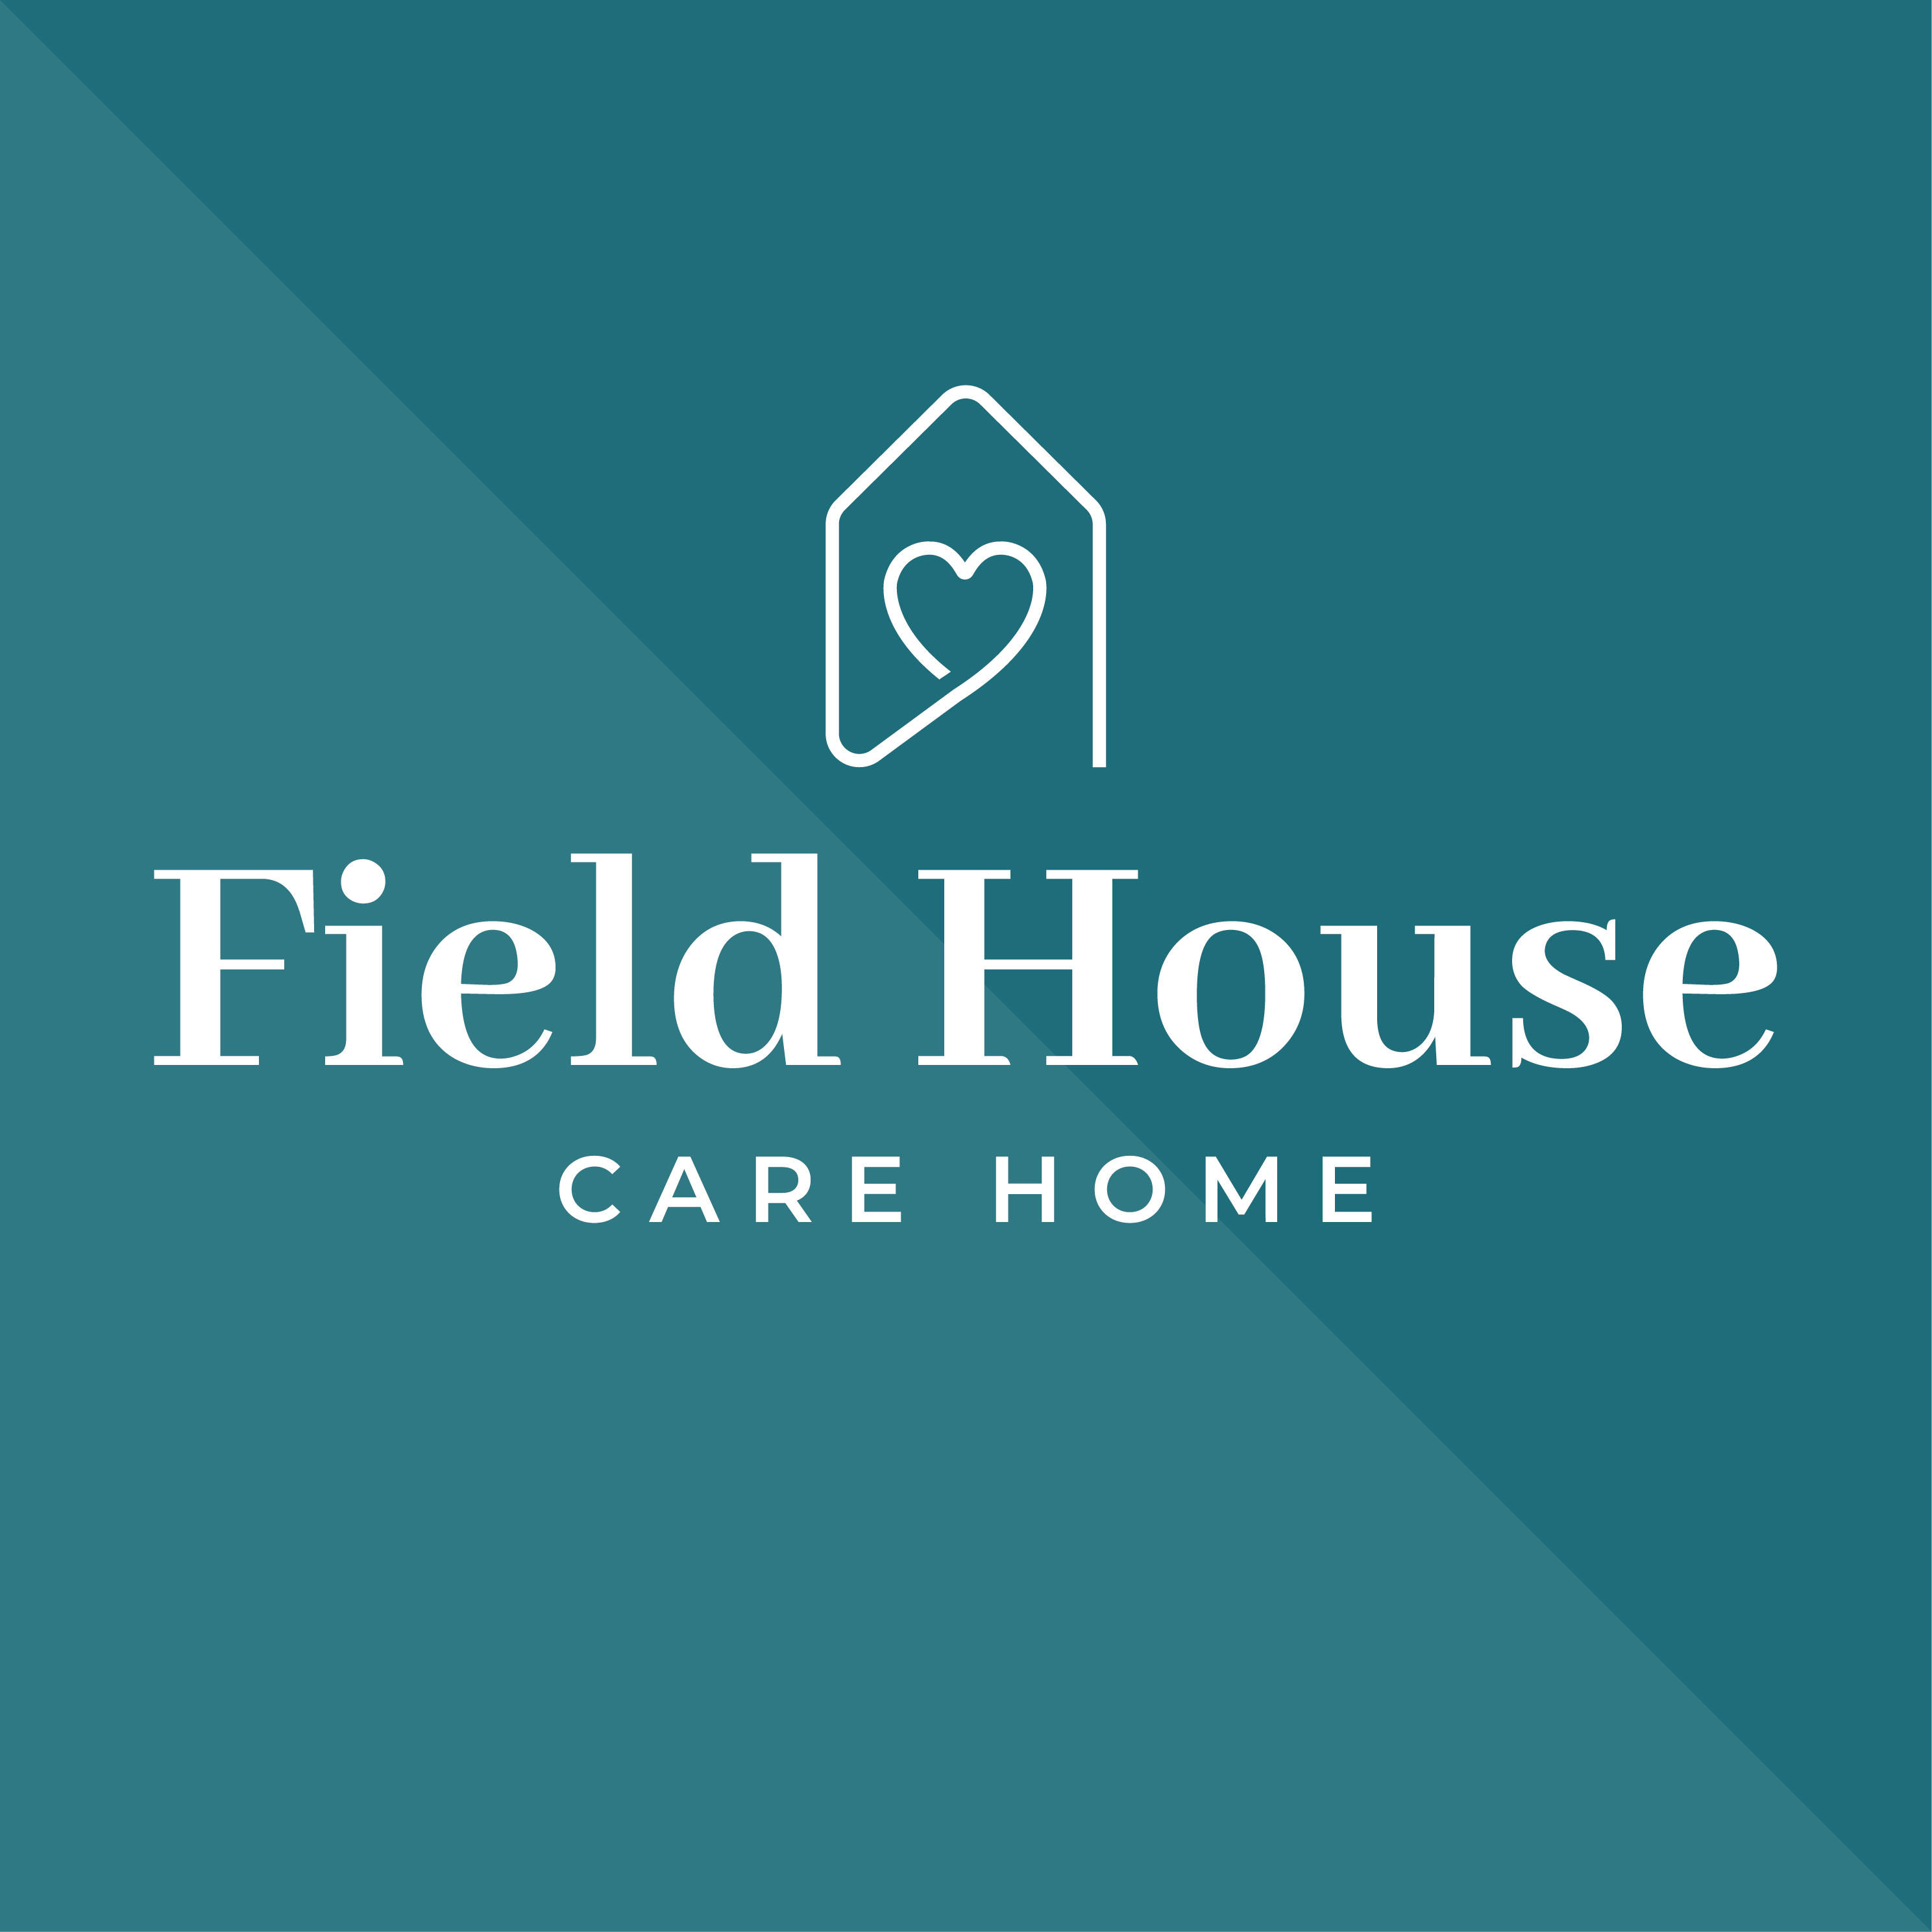 Field House - Care Home